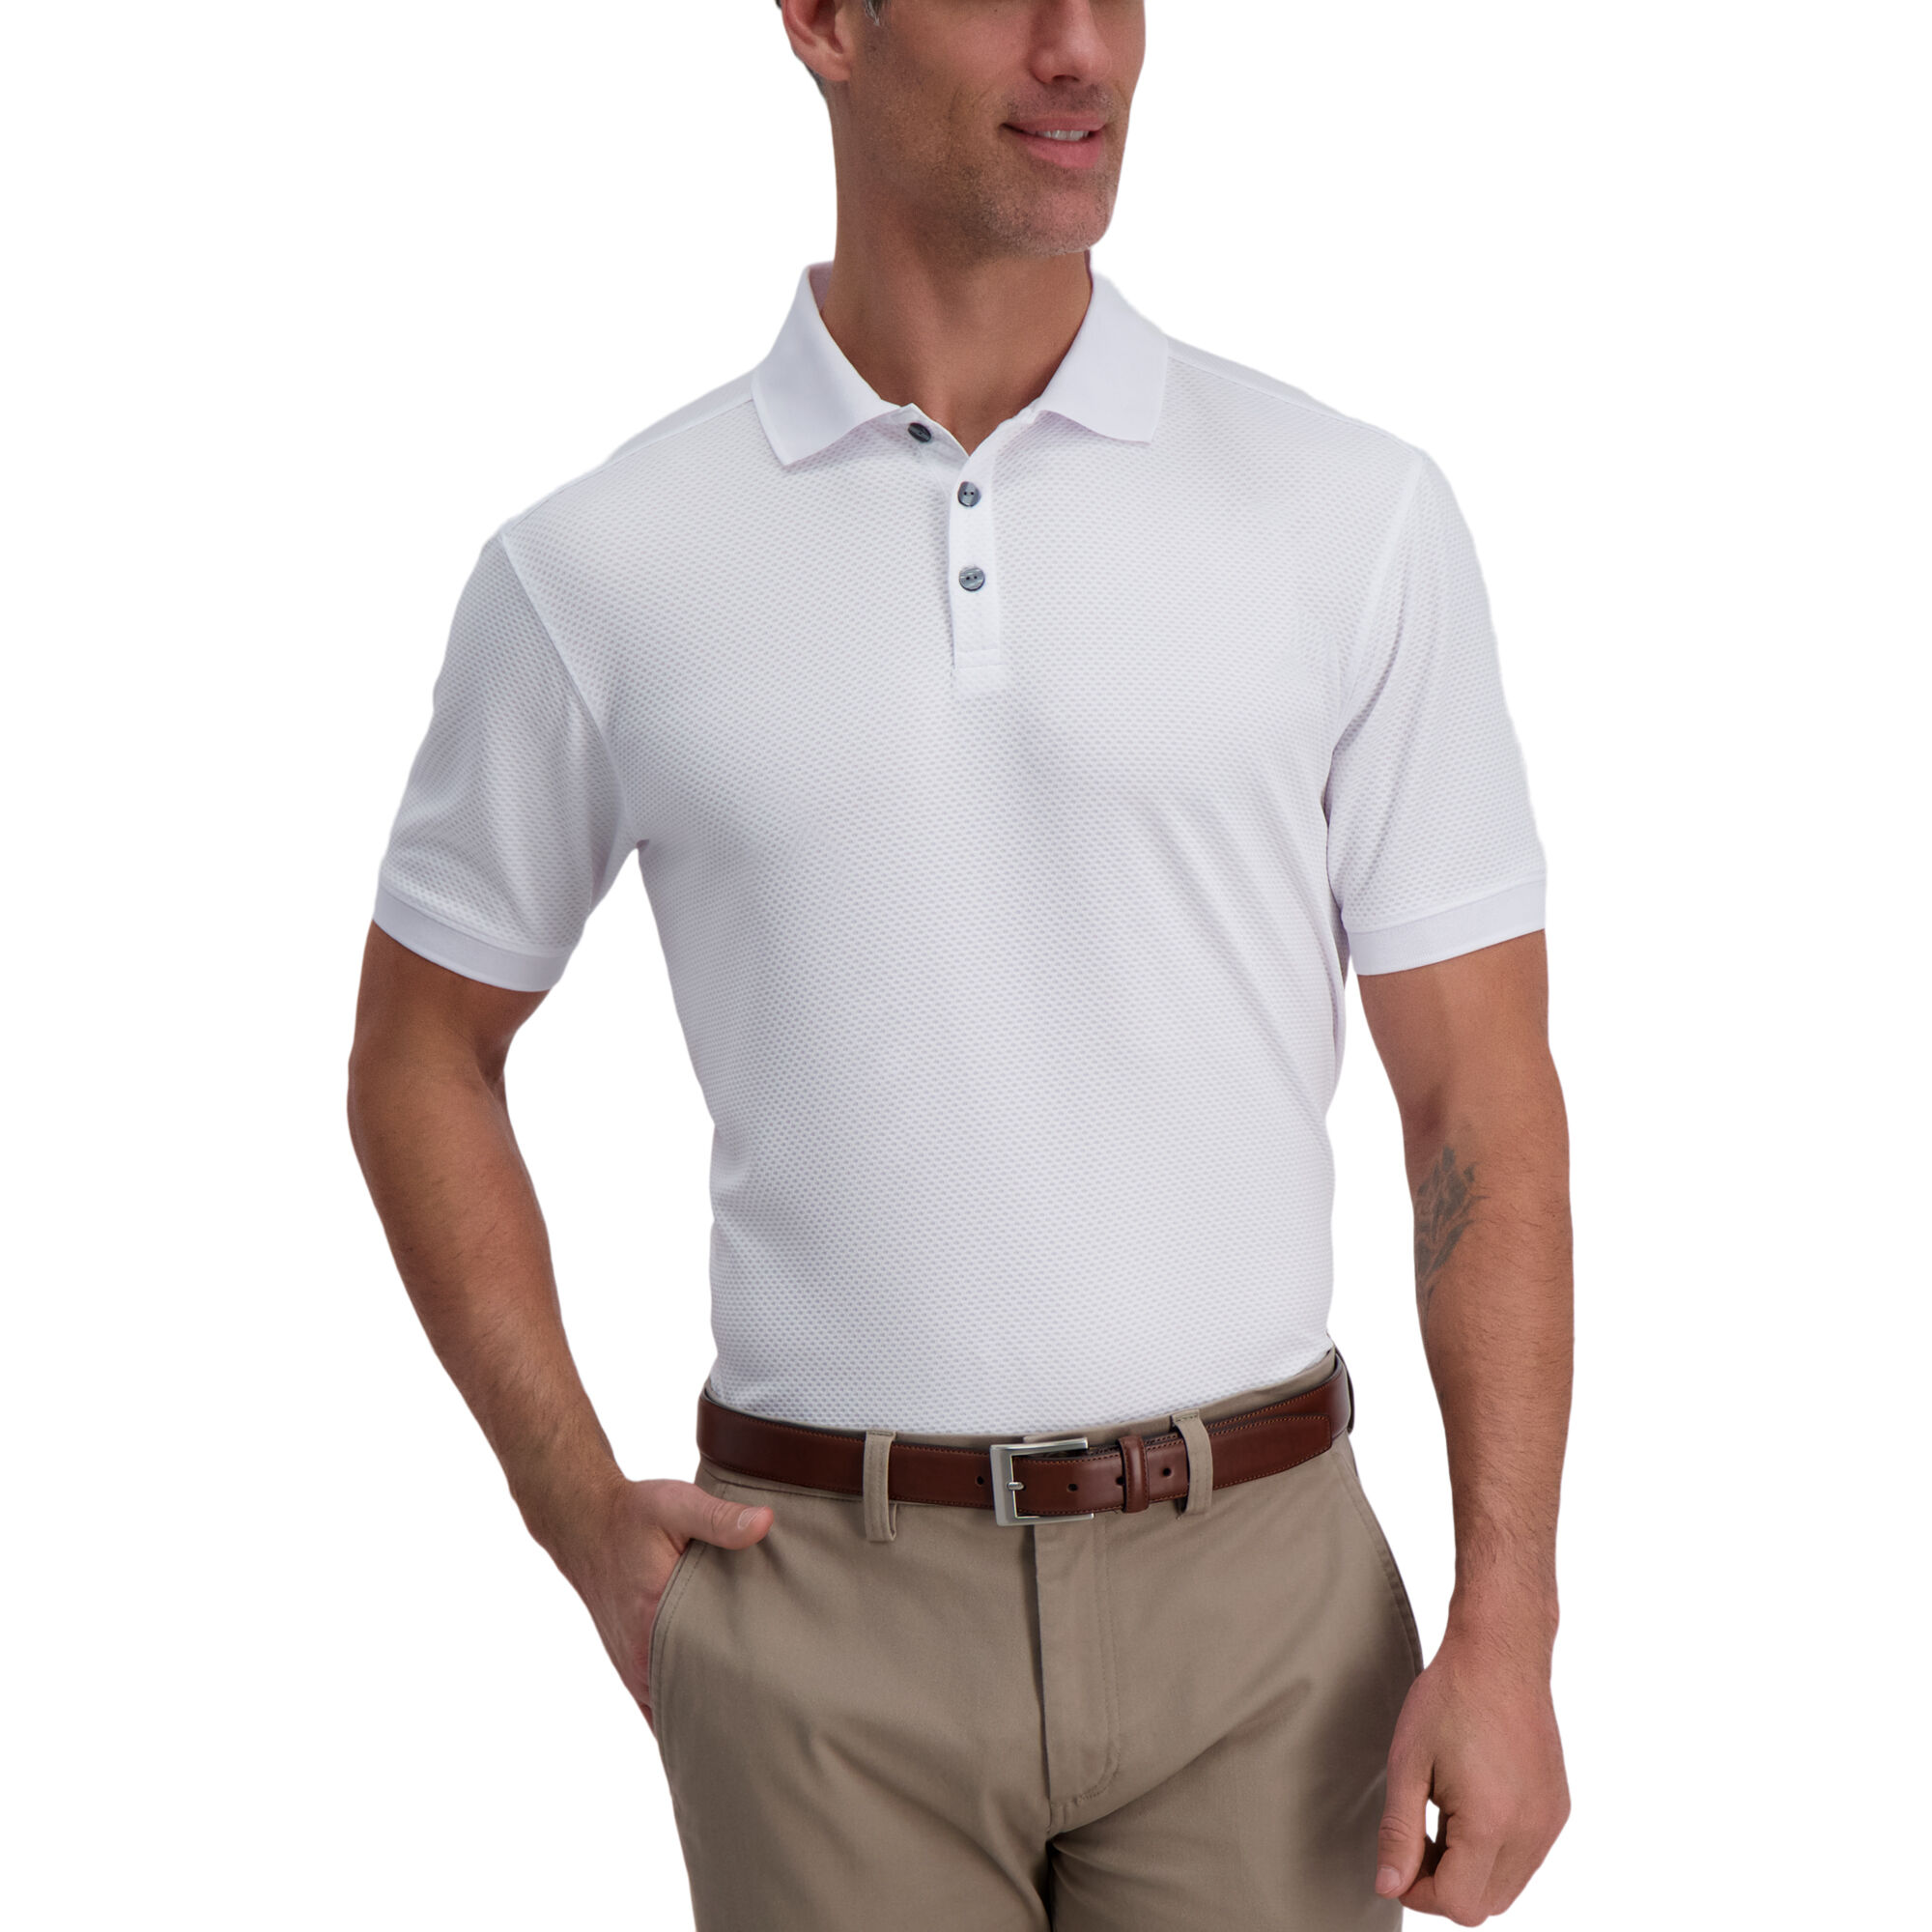 Haggar Cool 18 Pro Waffle Textured Golf Polo White (028476) photo